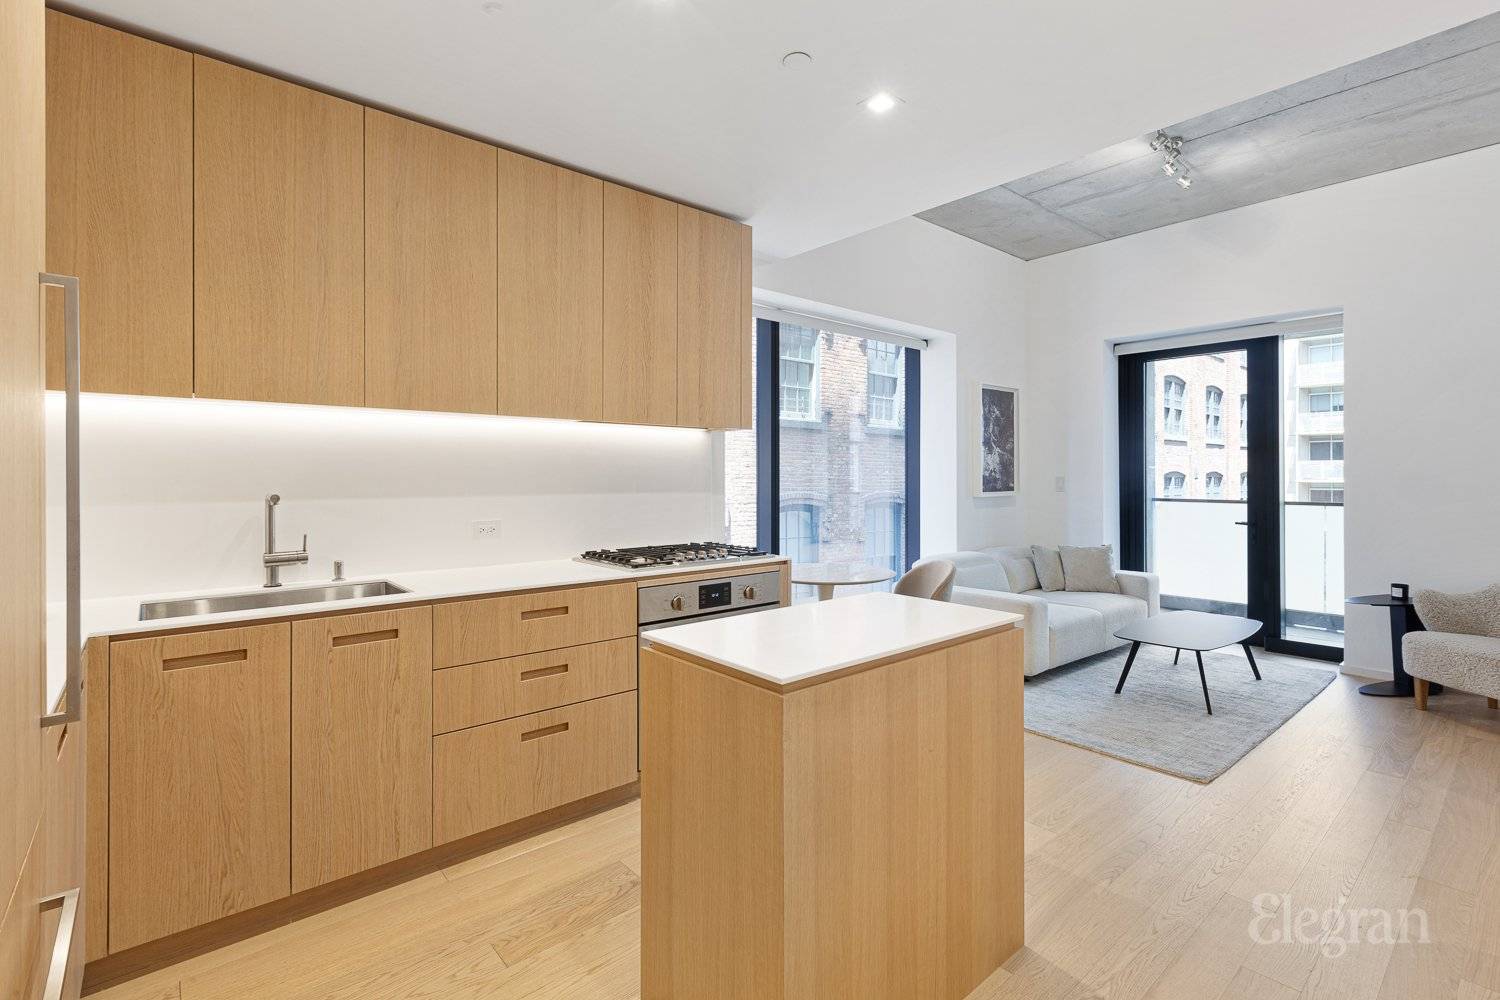 August 1st start date Fully furnished rental at 98 Front DUMBO in new luxury, full service condo development.